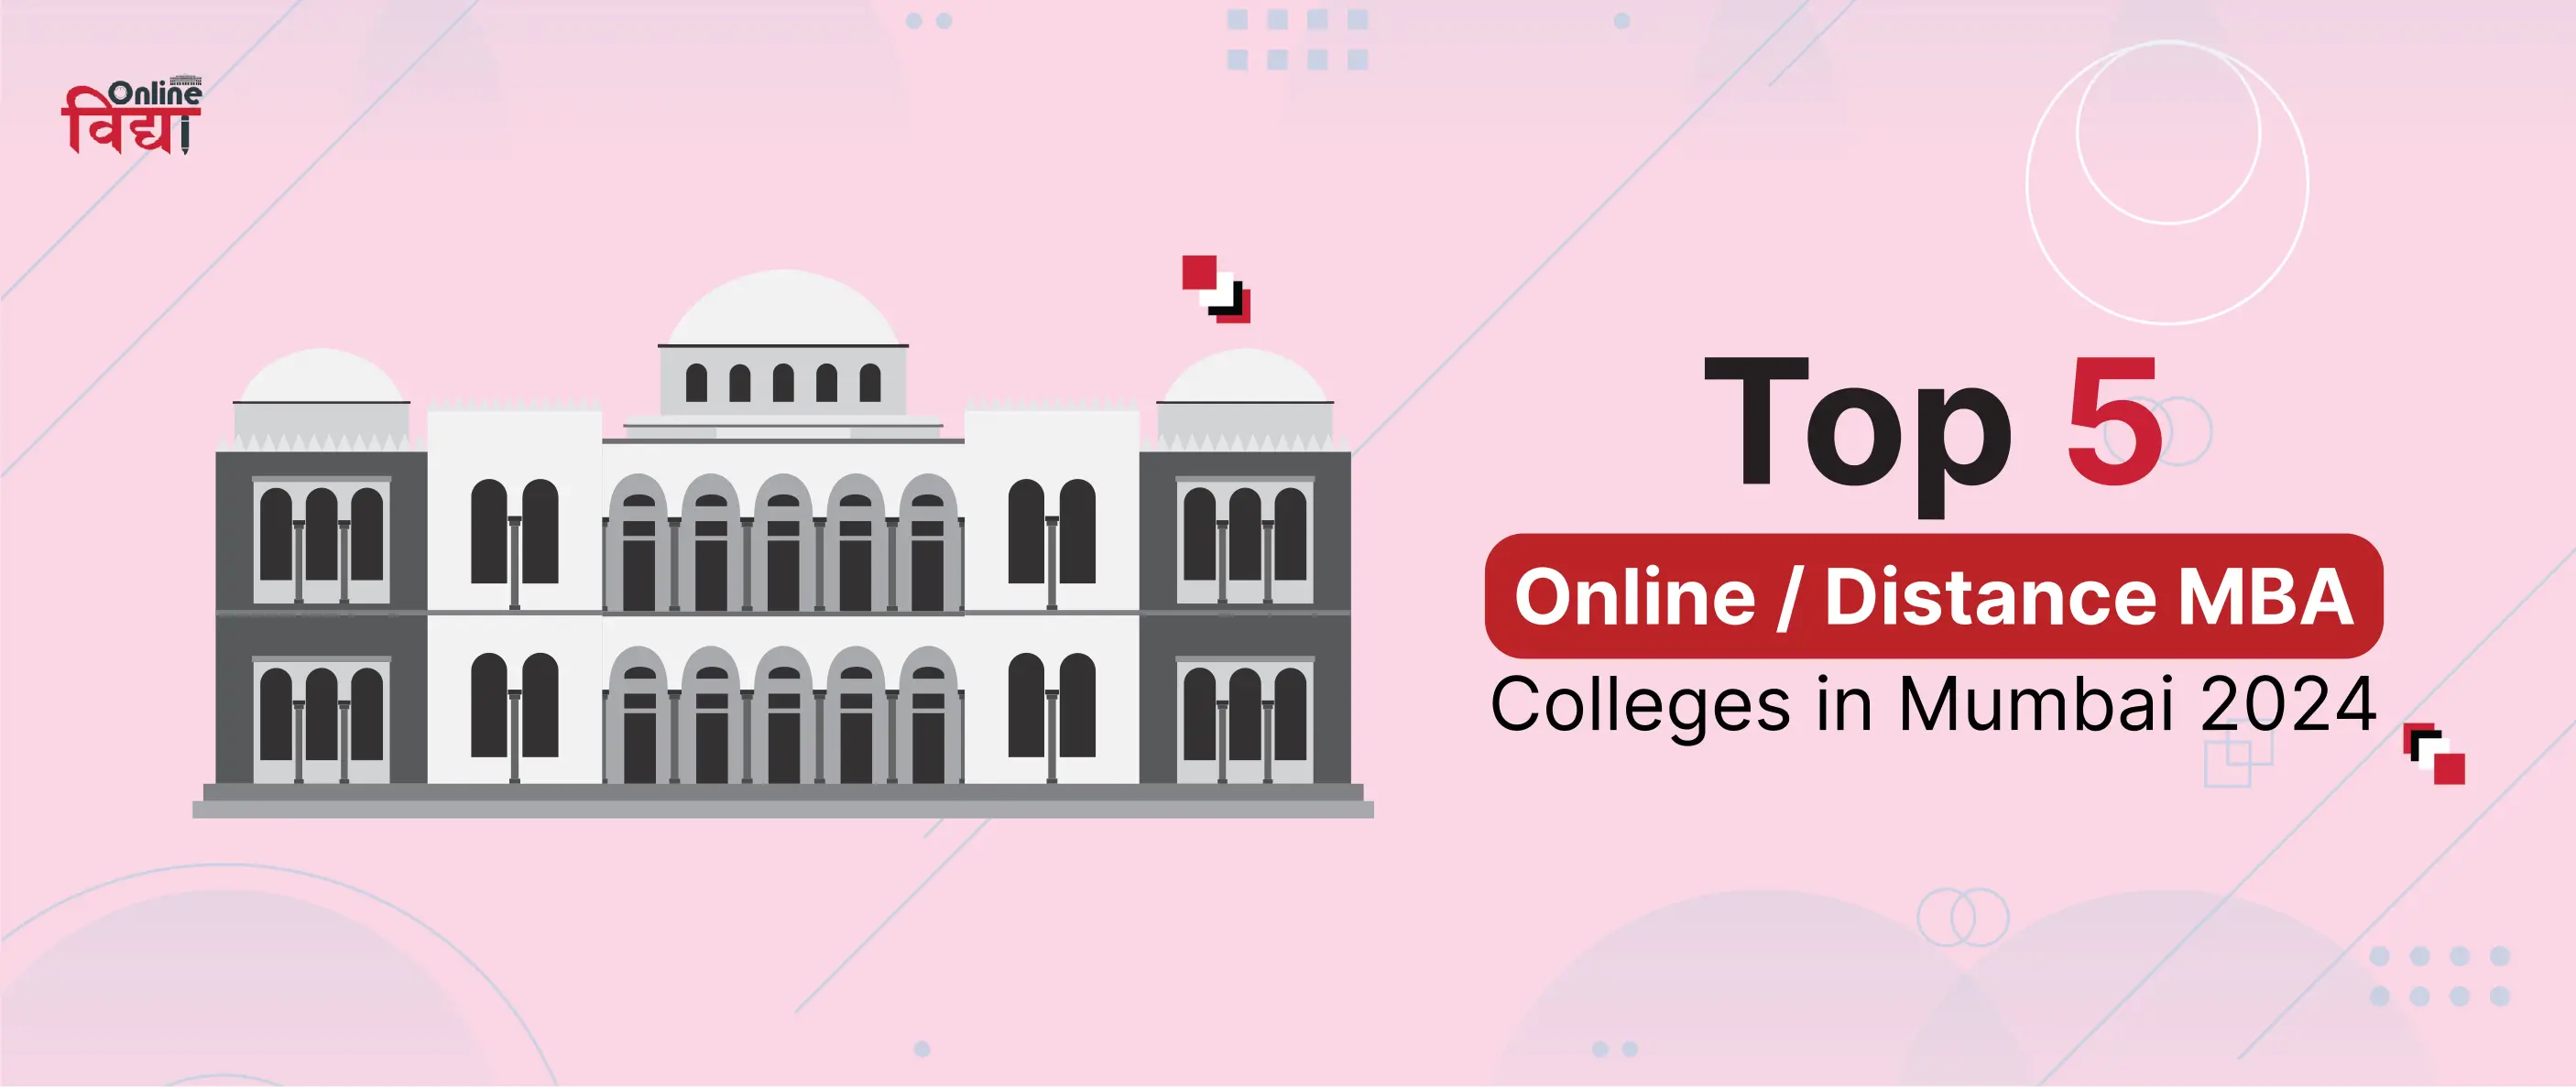 Top 5 Online/Distance MBA Colleges in Mumbai 2024